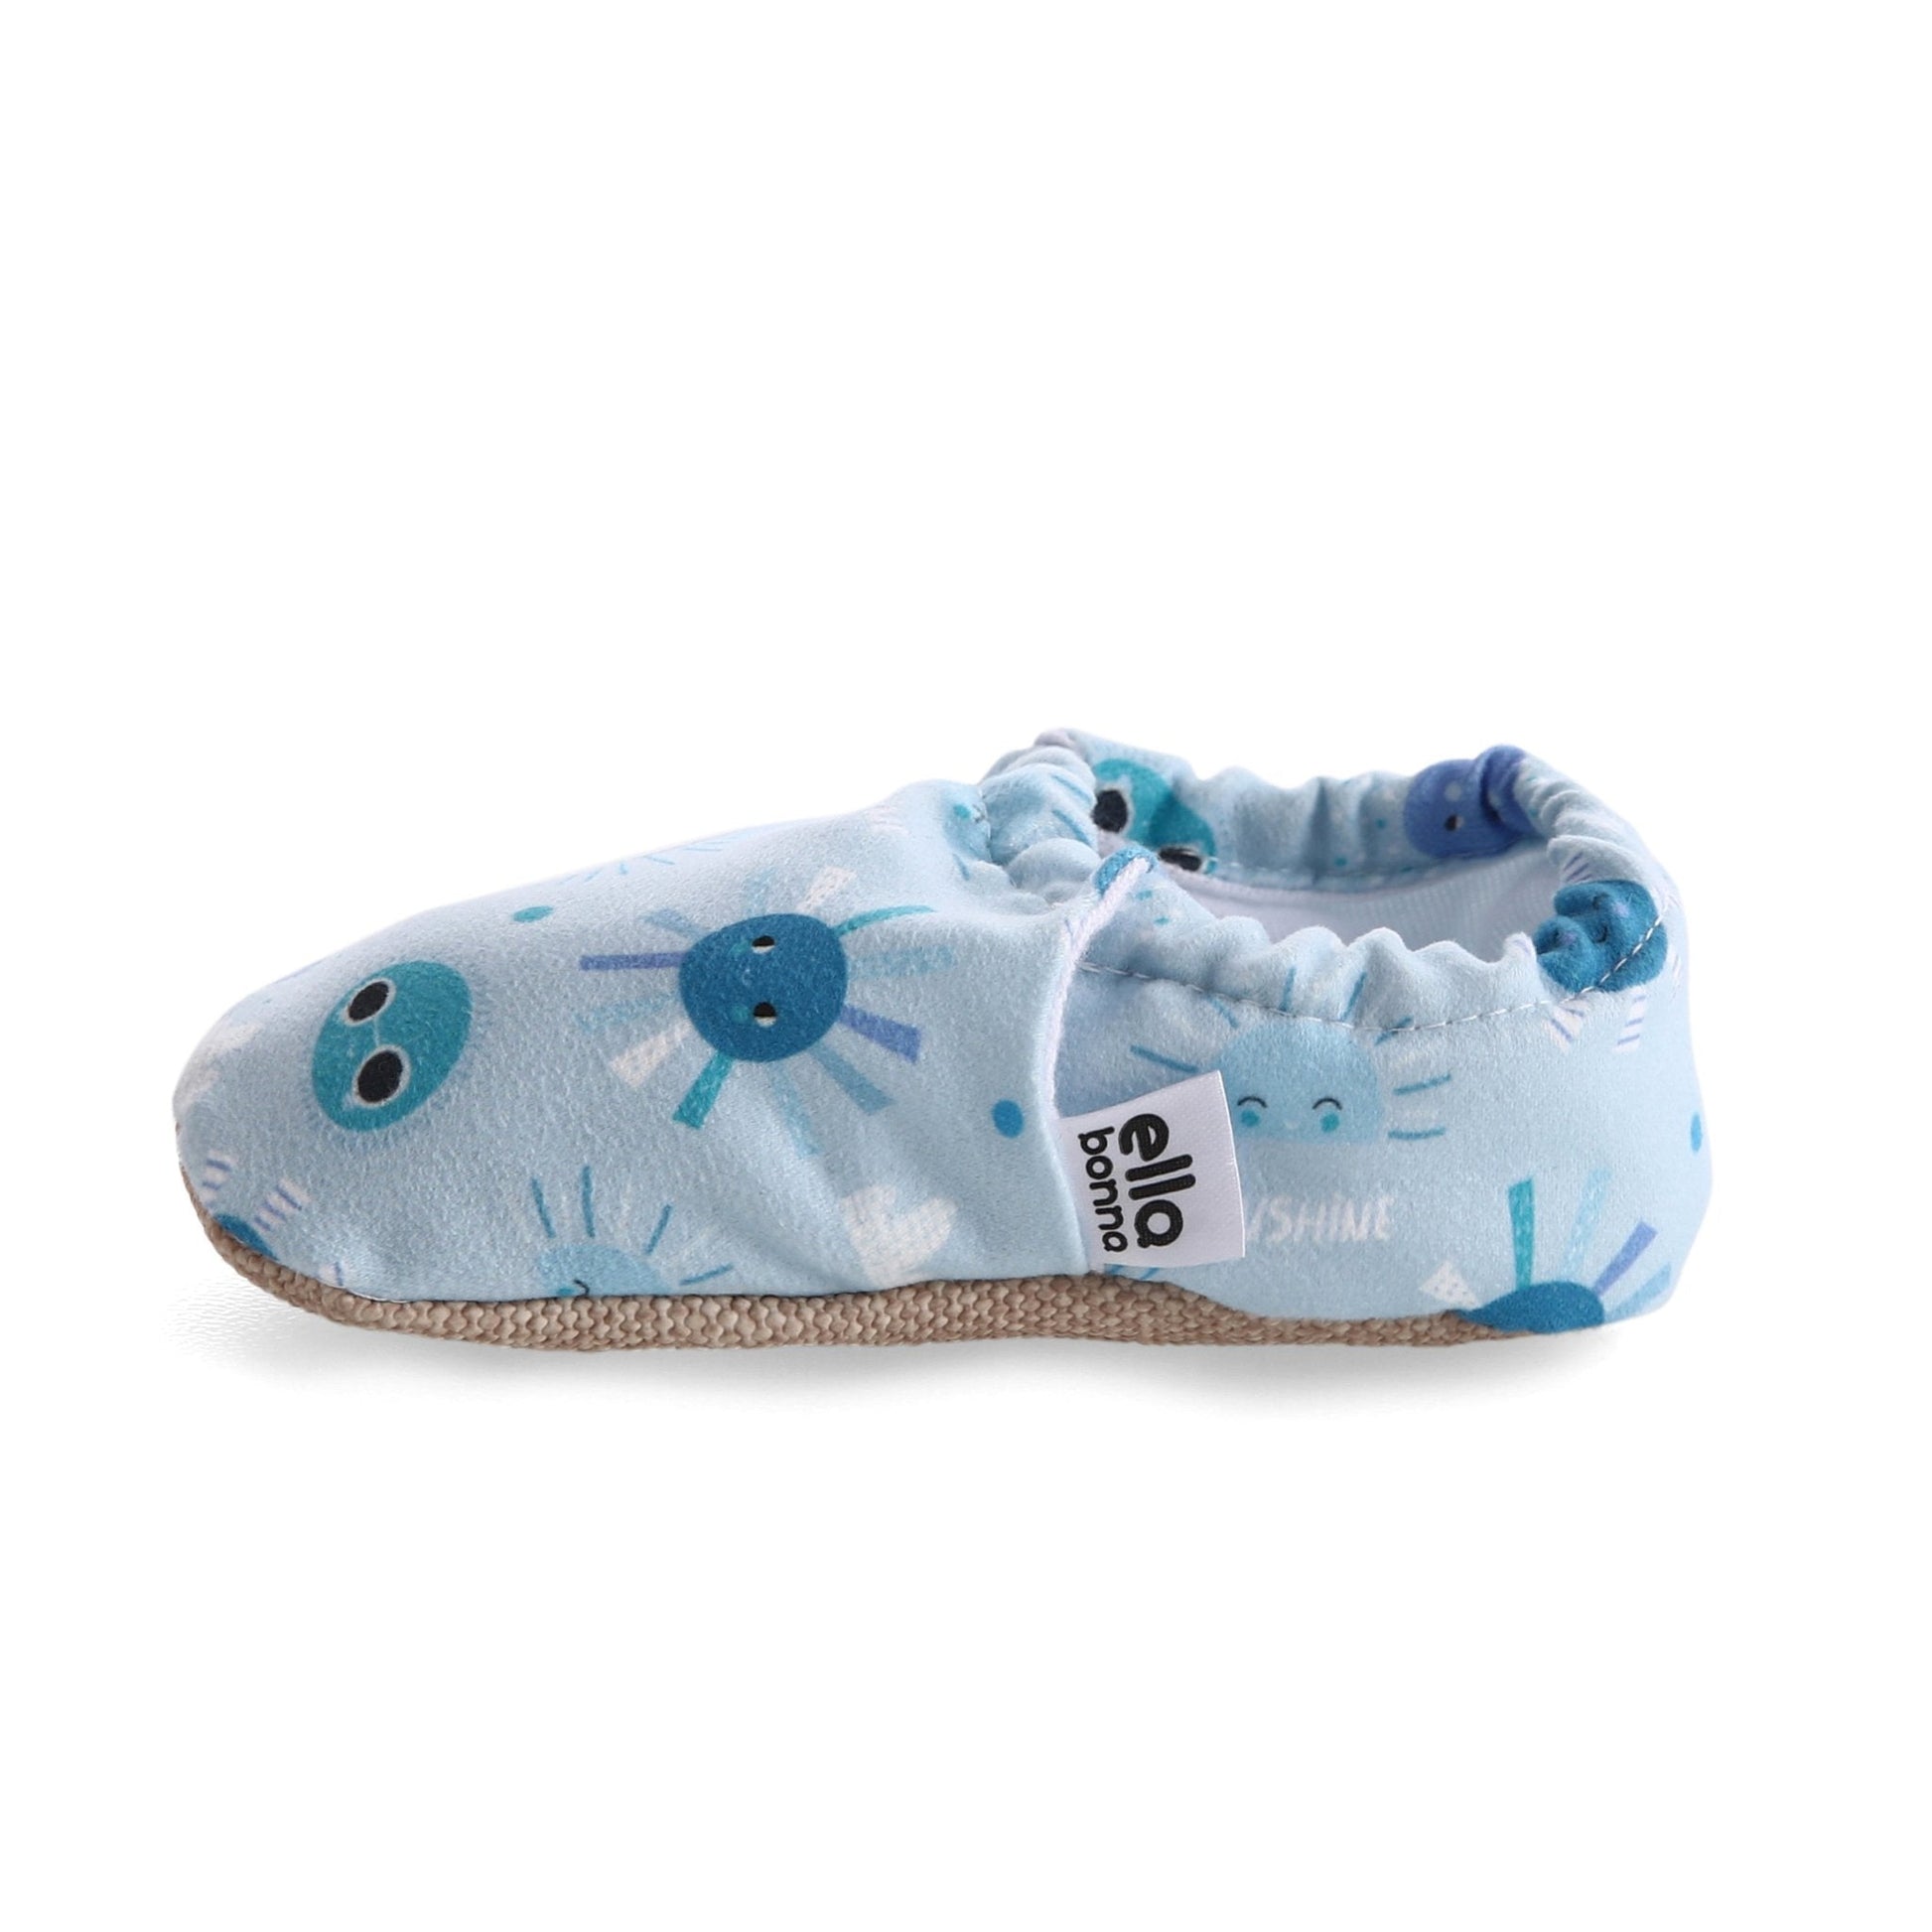 Sky Patterned Baby Booties